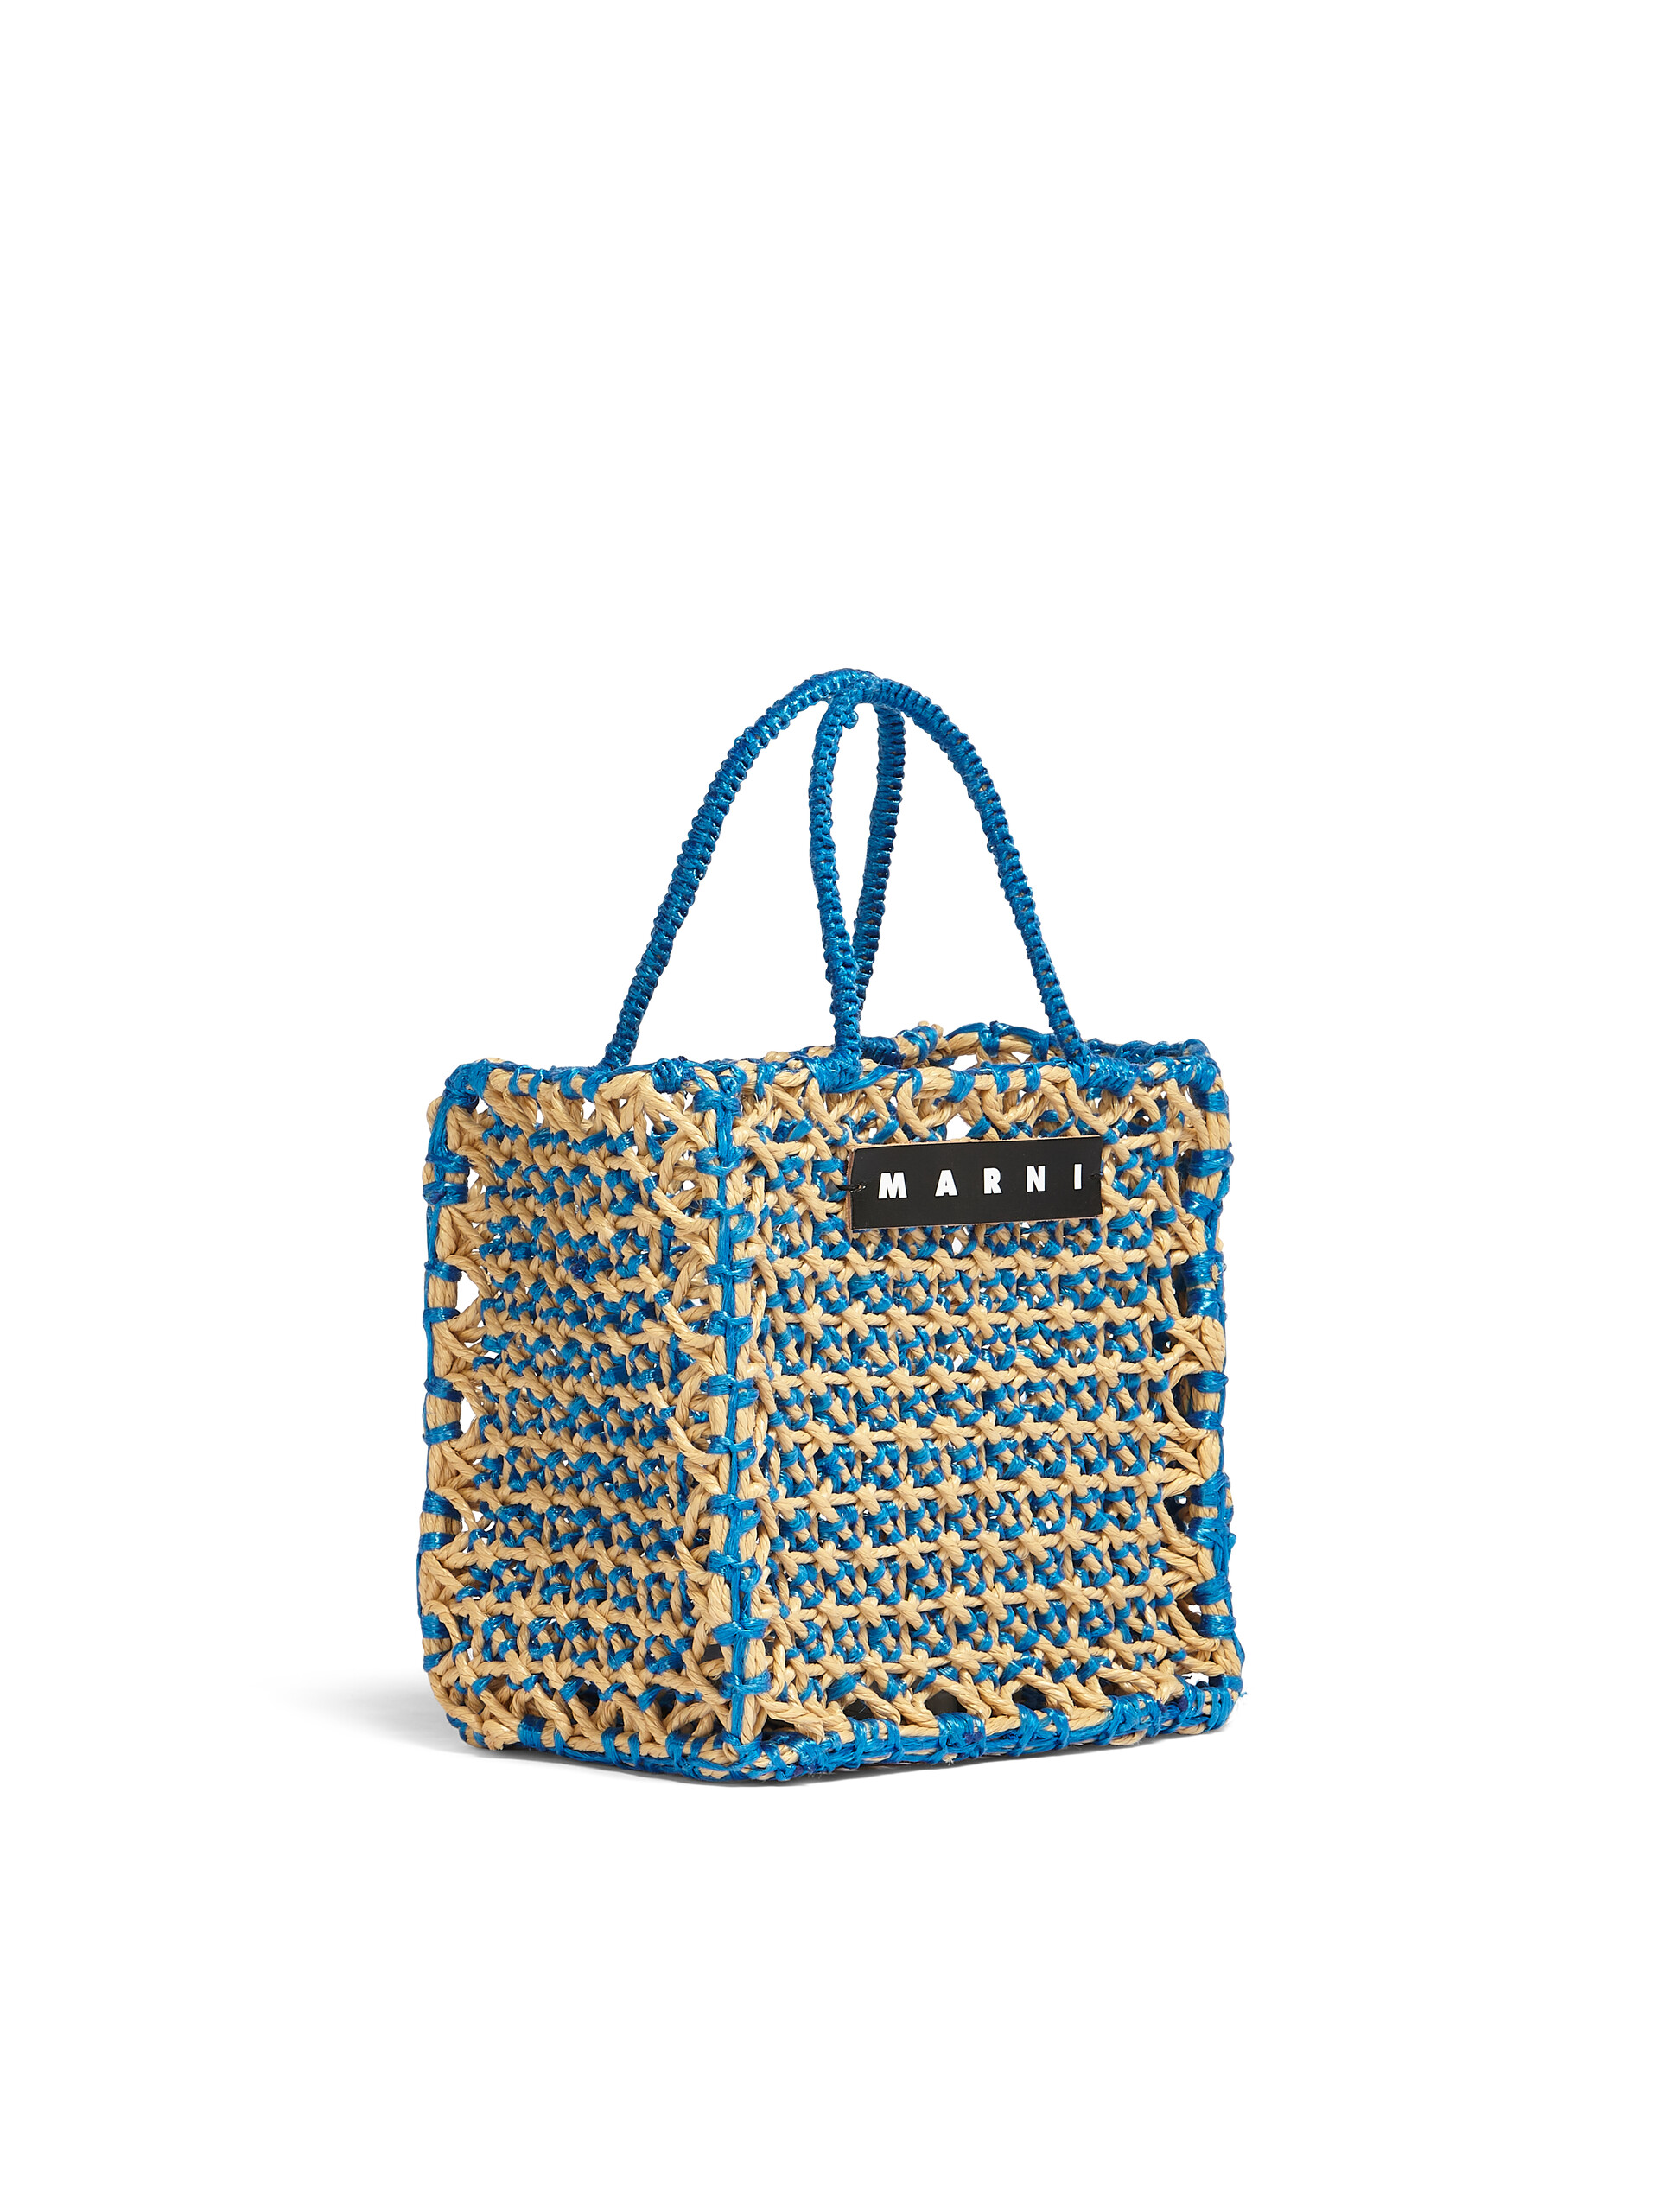 MARNI MARKET JURTA small bag in pale blue and beige crochet - Shopping Bags - Image 2